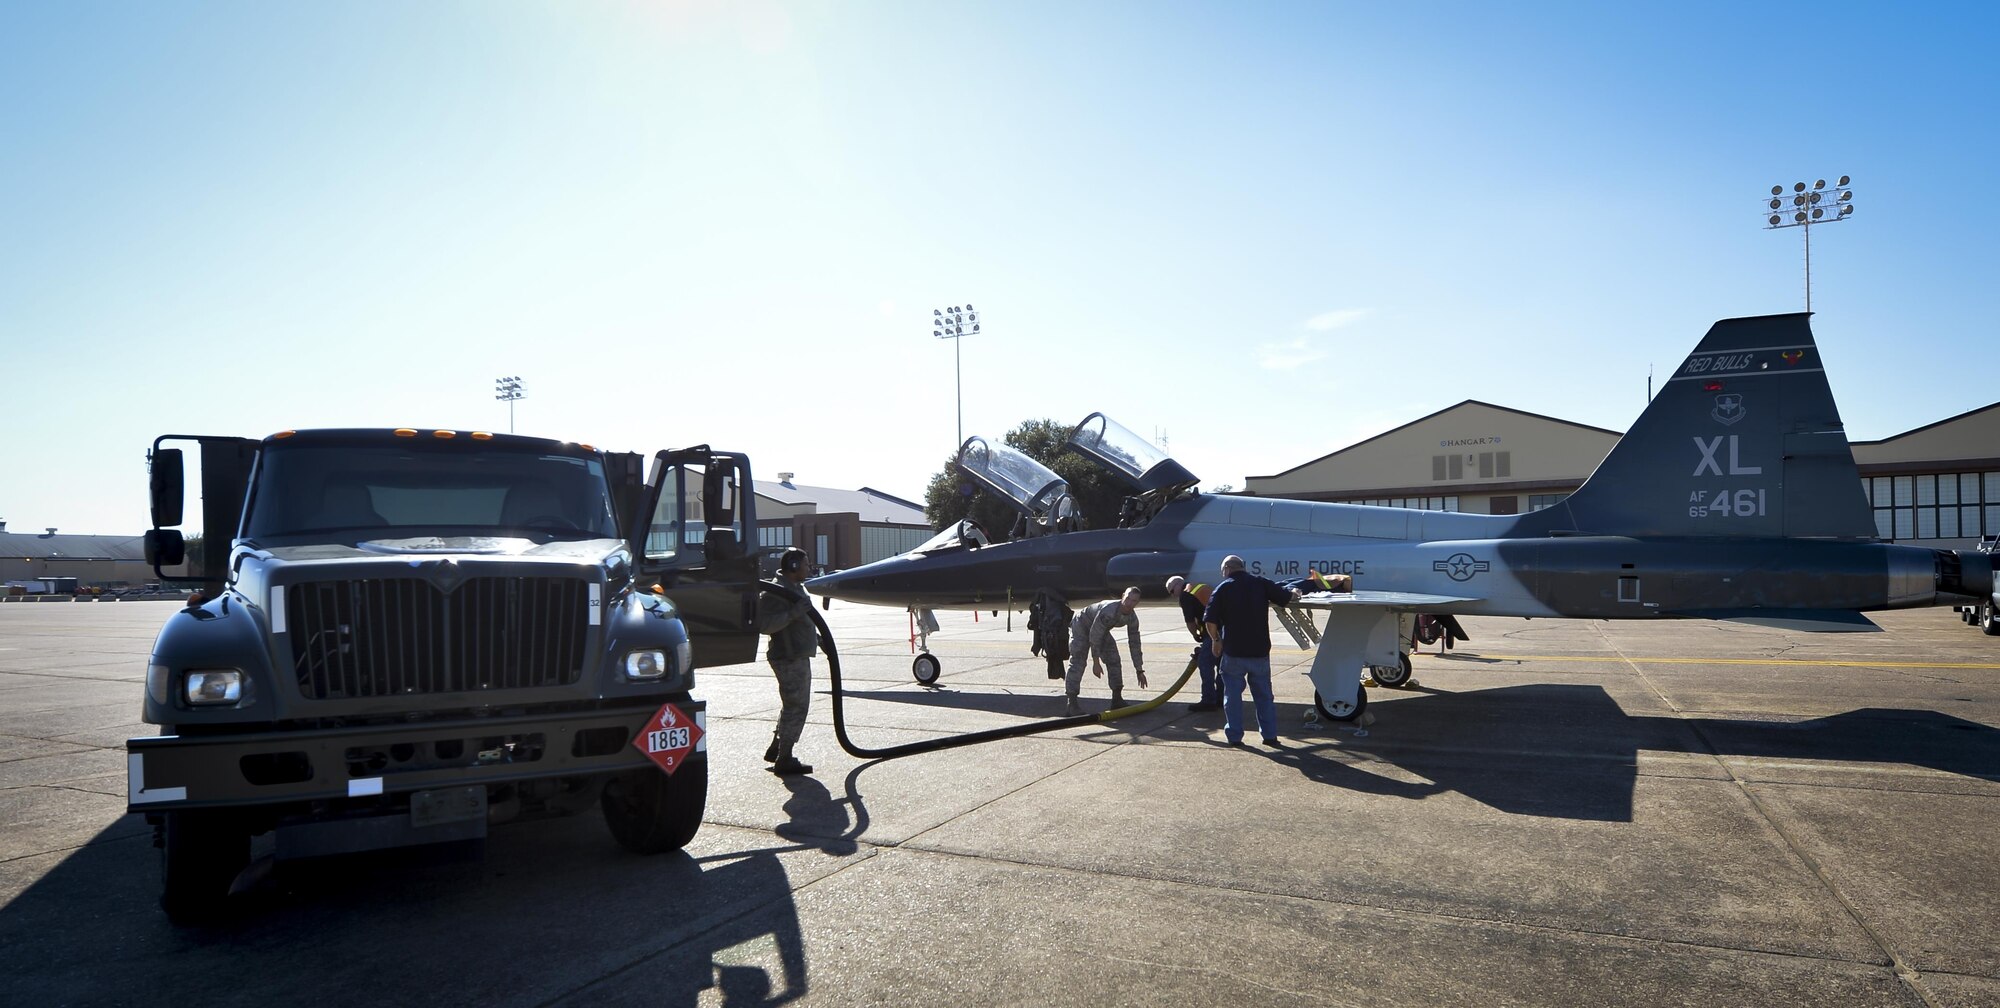 Airmen assigned to the 2nd Logistics Rediness Squadron petroleum, oils and lubricants distribution flight fuel a visiting T-38 Talon at Barksdale Air Force Base, La., Jan. 12, 2016. Distribution flight Airmen are trained to provide fuel to a variery of different aircraft. (U.S. Air Force photo/Airman 1st Class Mozer O. Da Cunha)